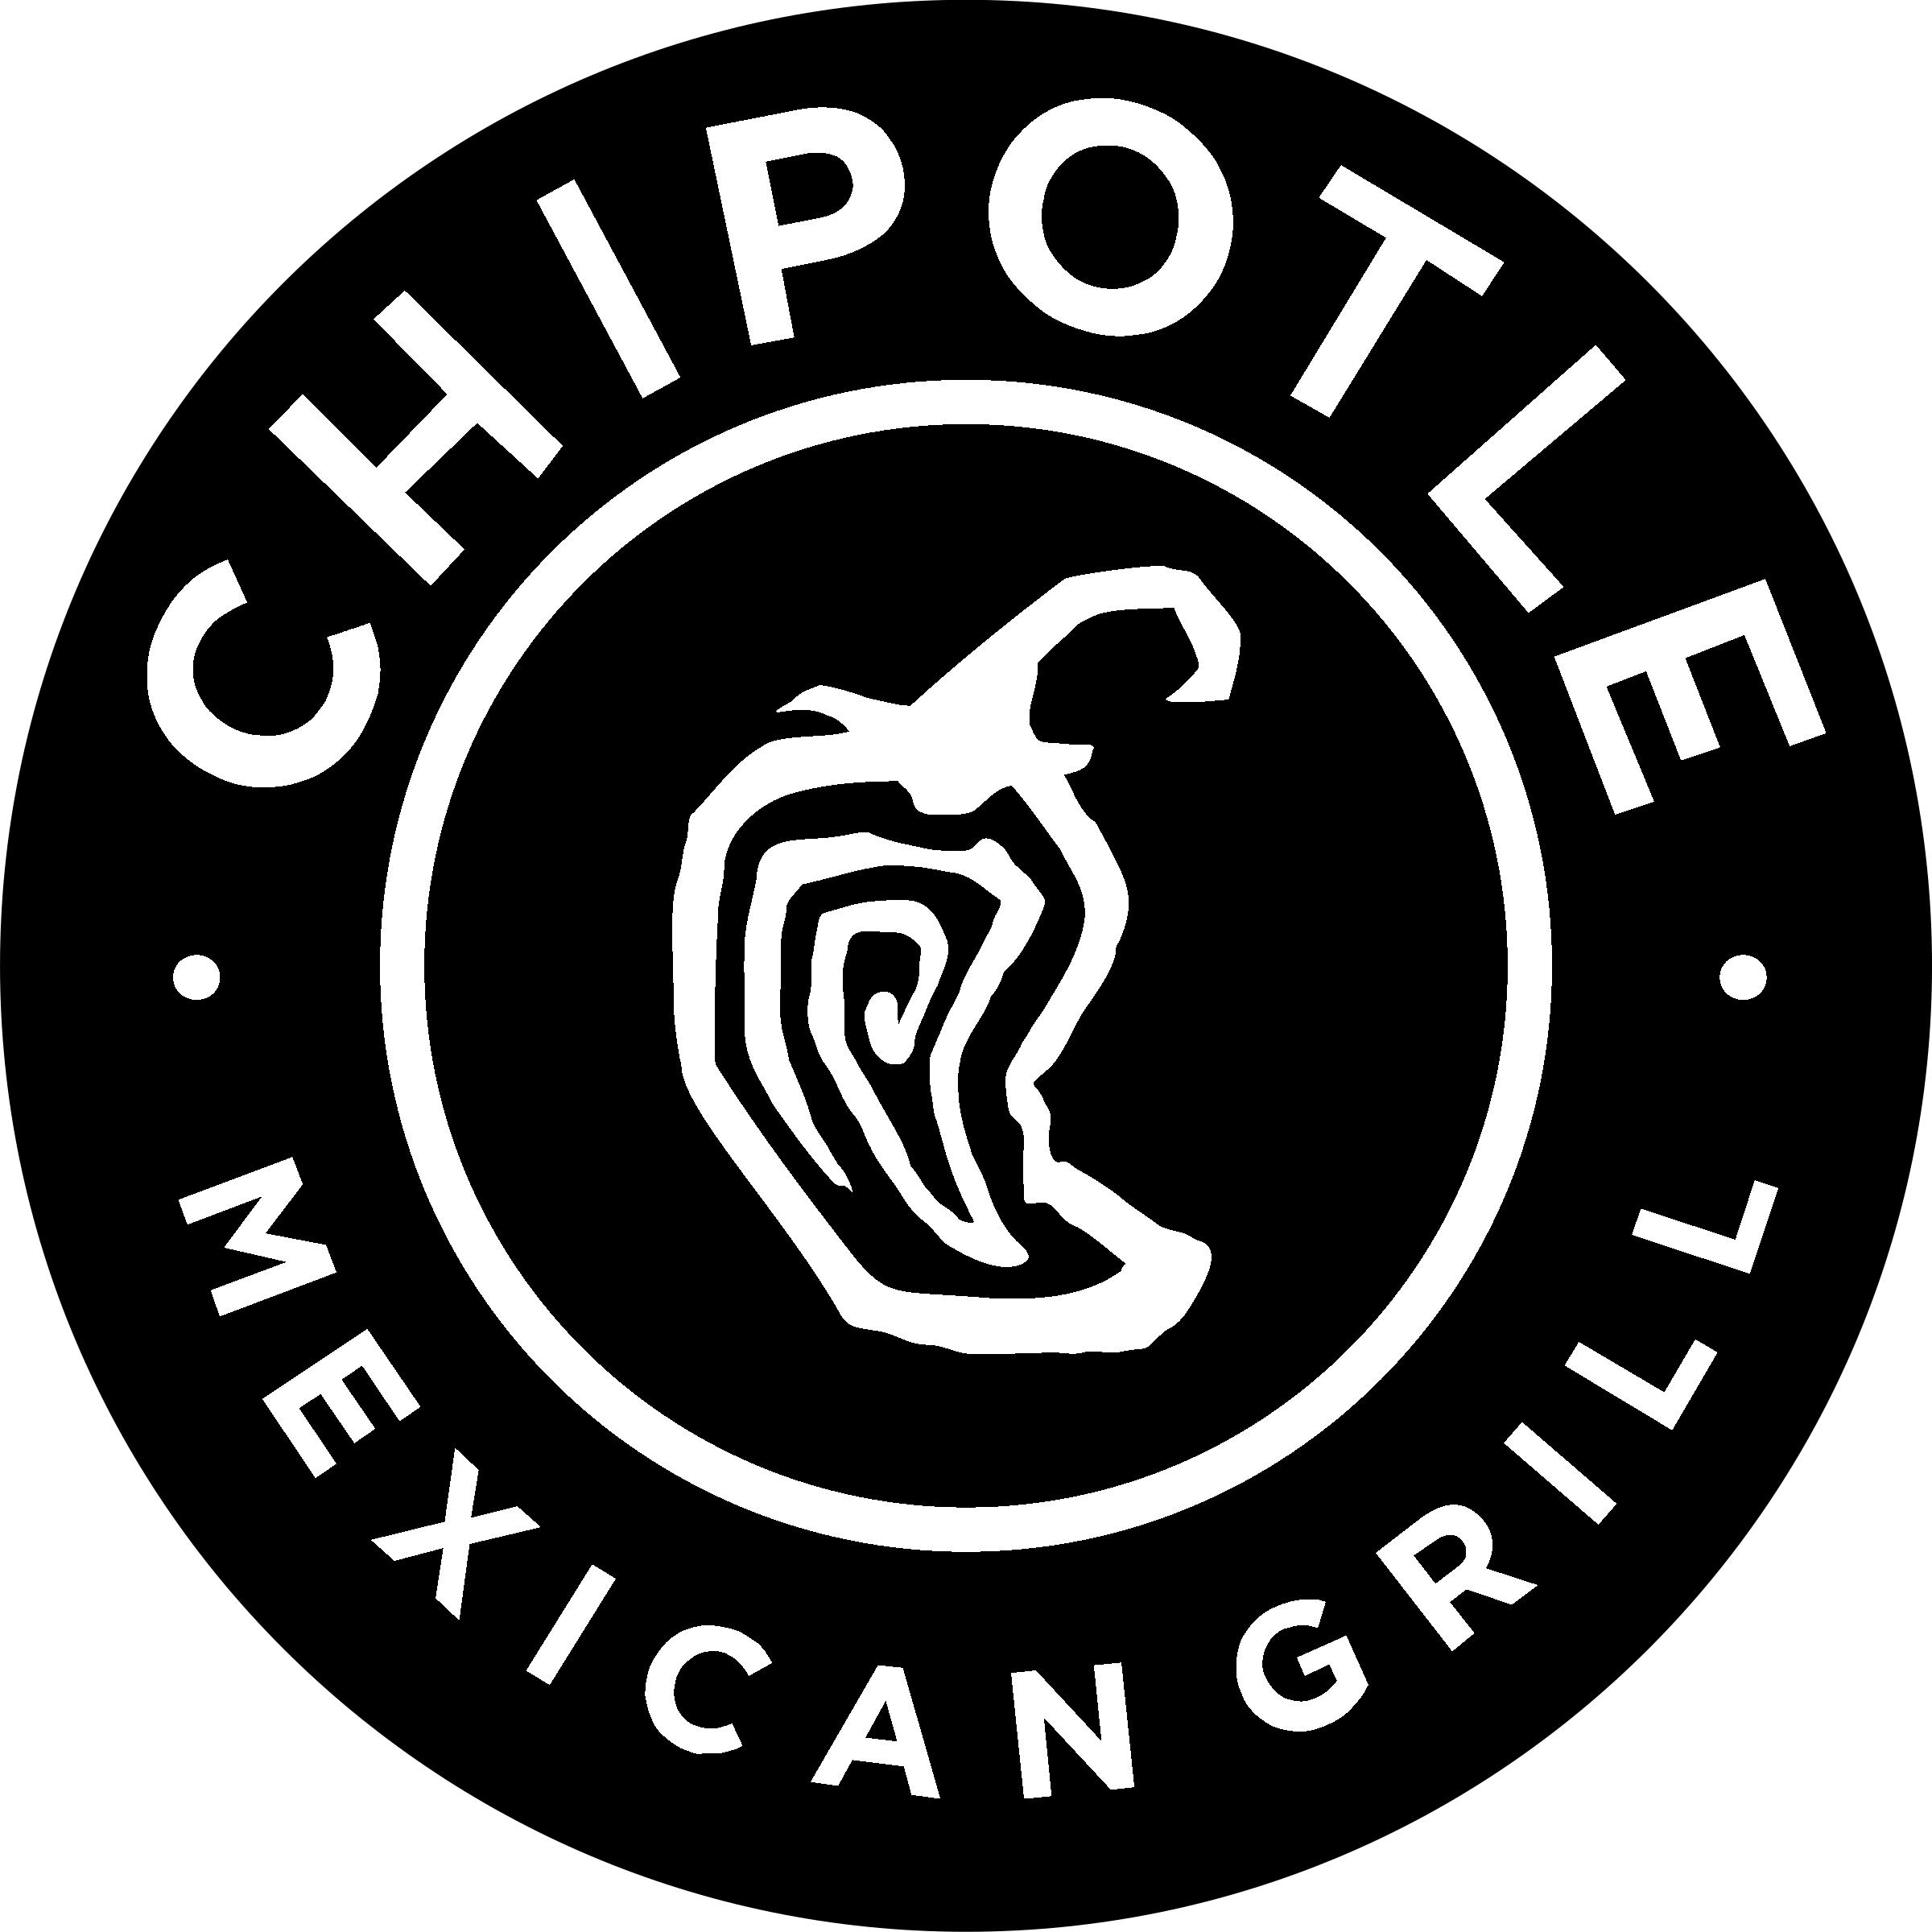 Mexican Black and White Logo - Chipotle Mexican Grill Logo SVG Vector & PNG Transparent